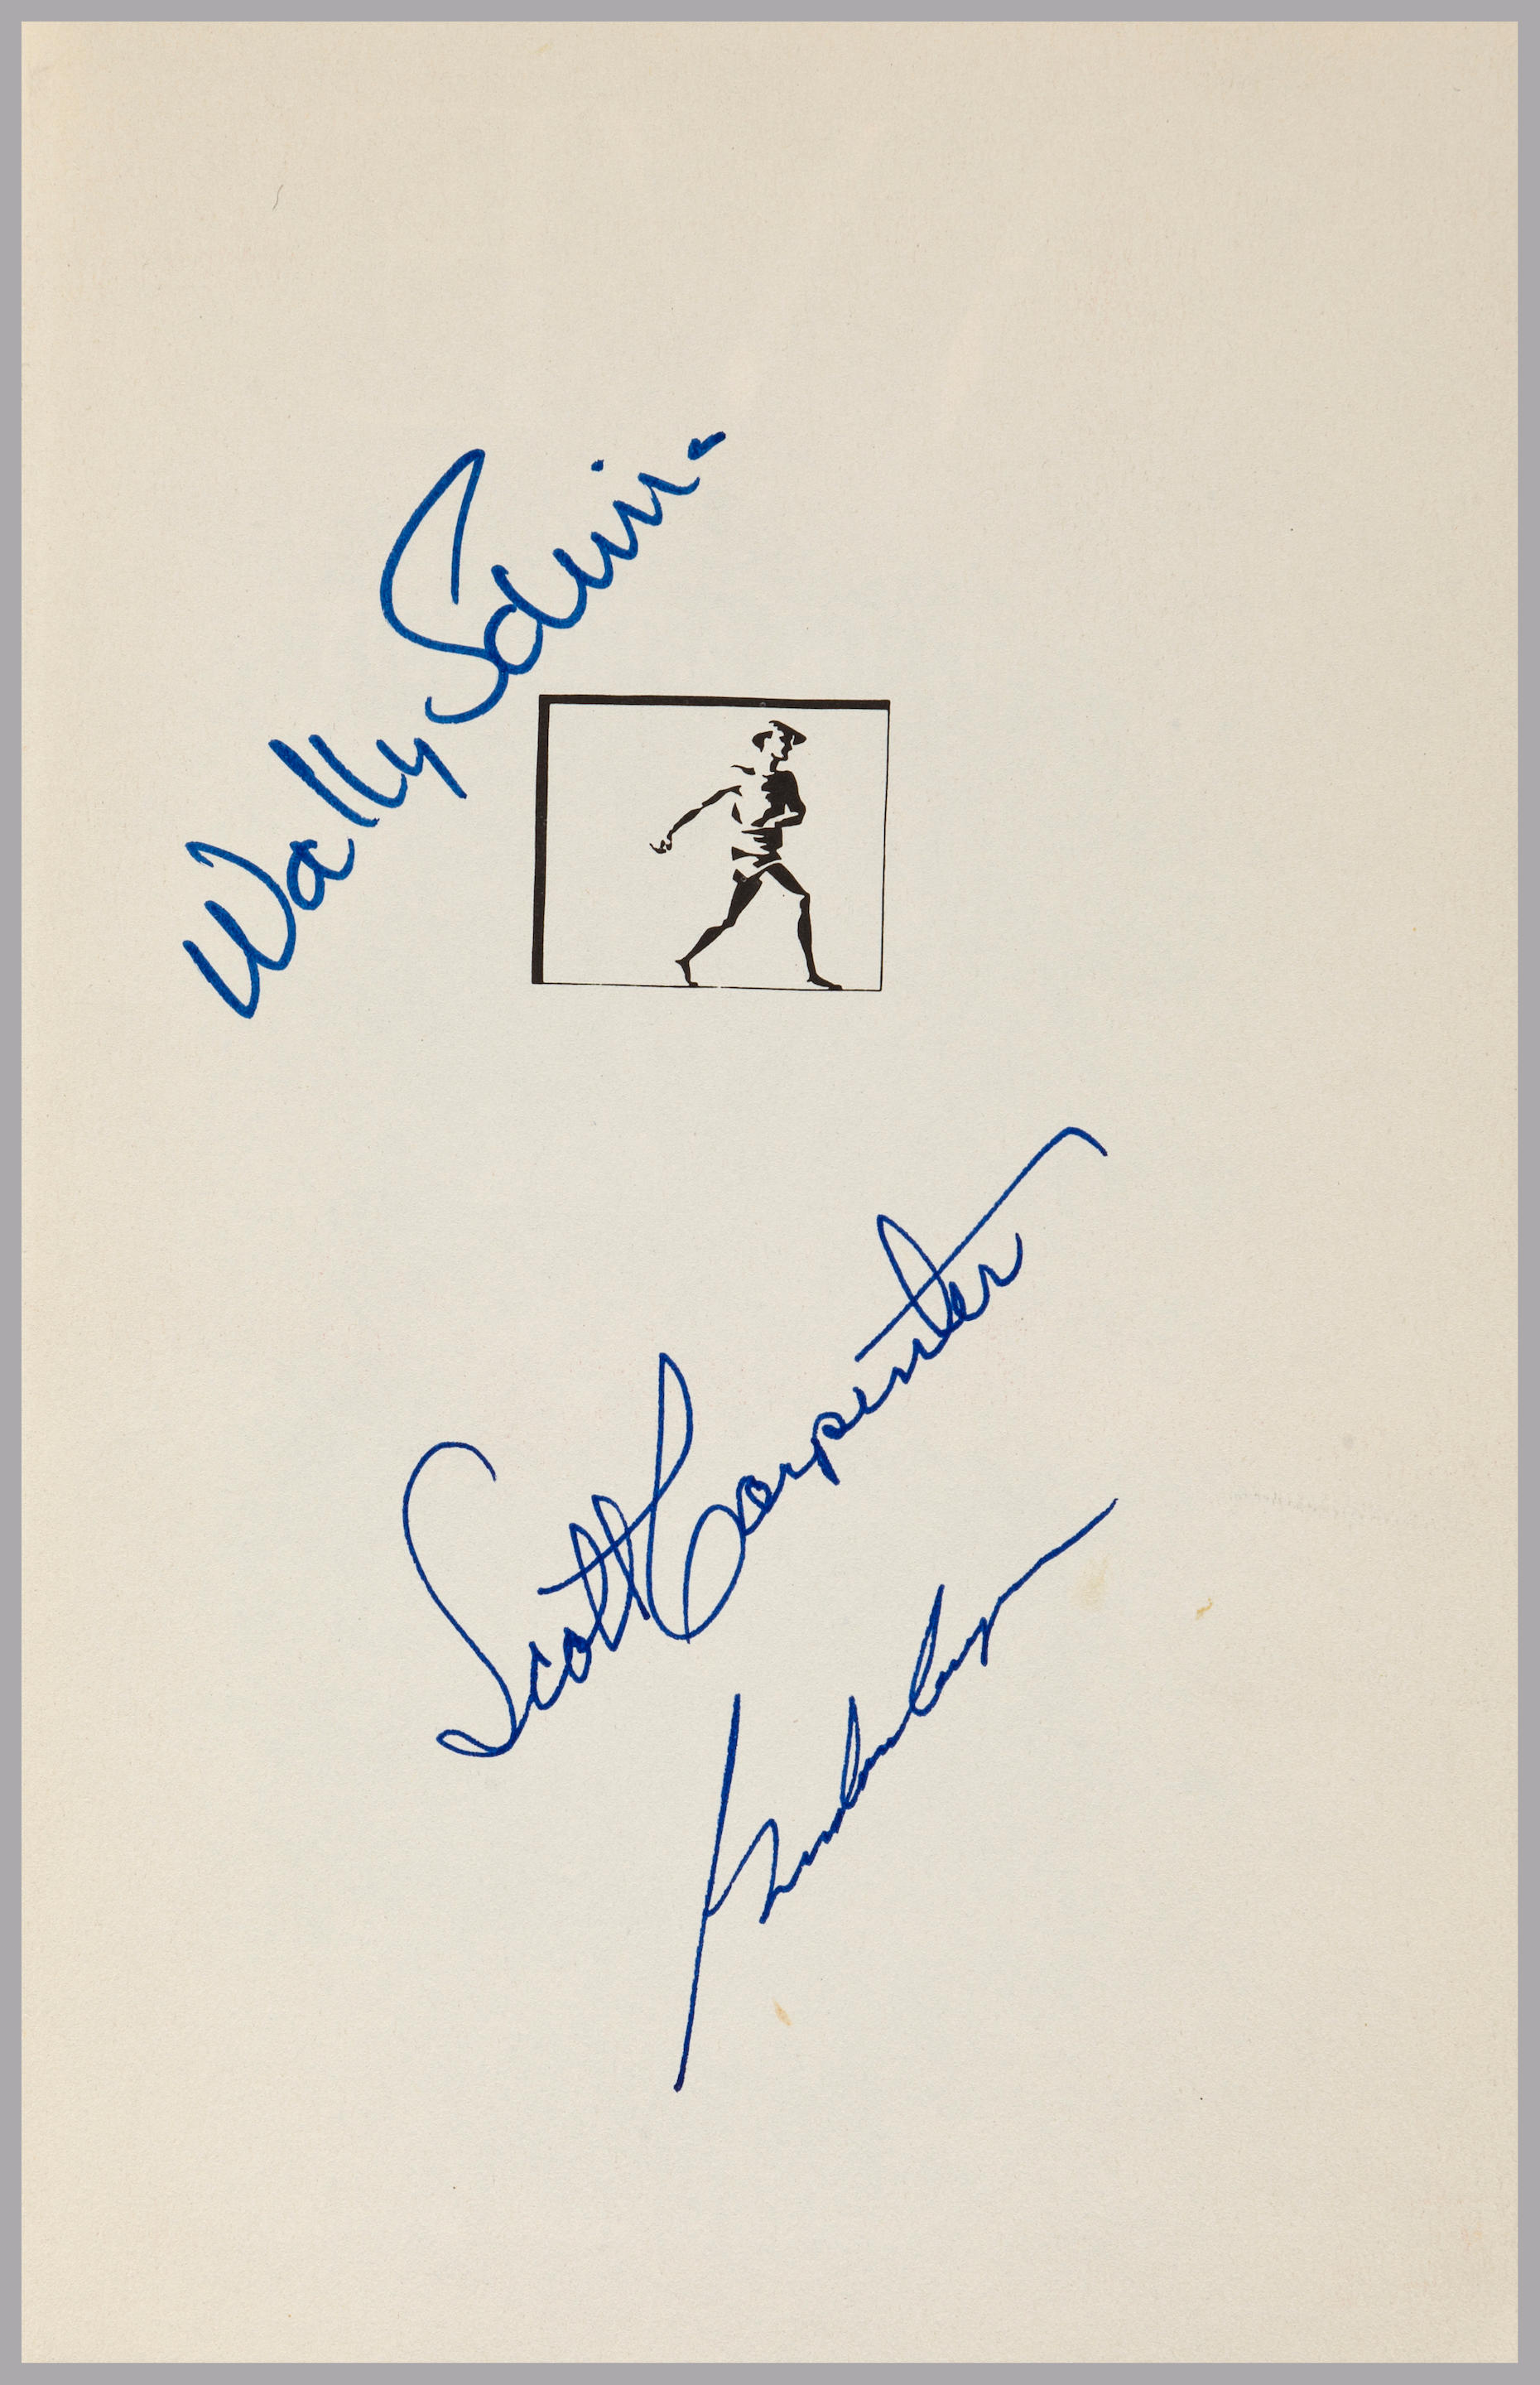 CARPENTER, M. SCOTT, AND OTHERS—SIGNED.